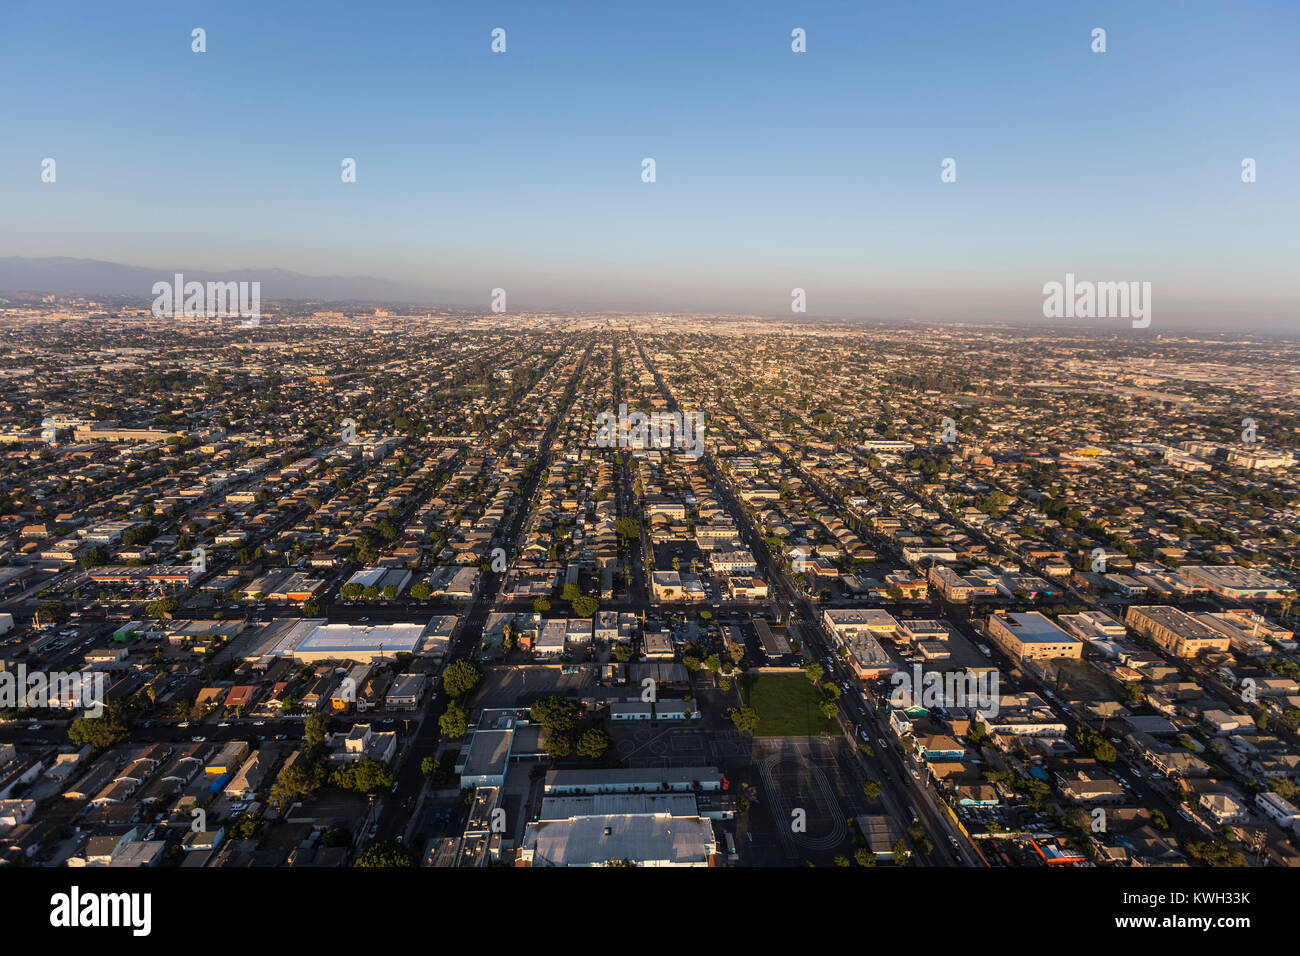 Late afternoon aerial view of buildings and streets in south Los Angeles, California. Stock Photo